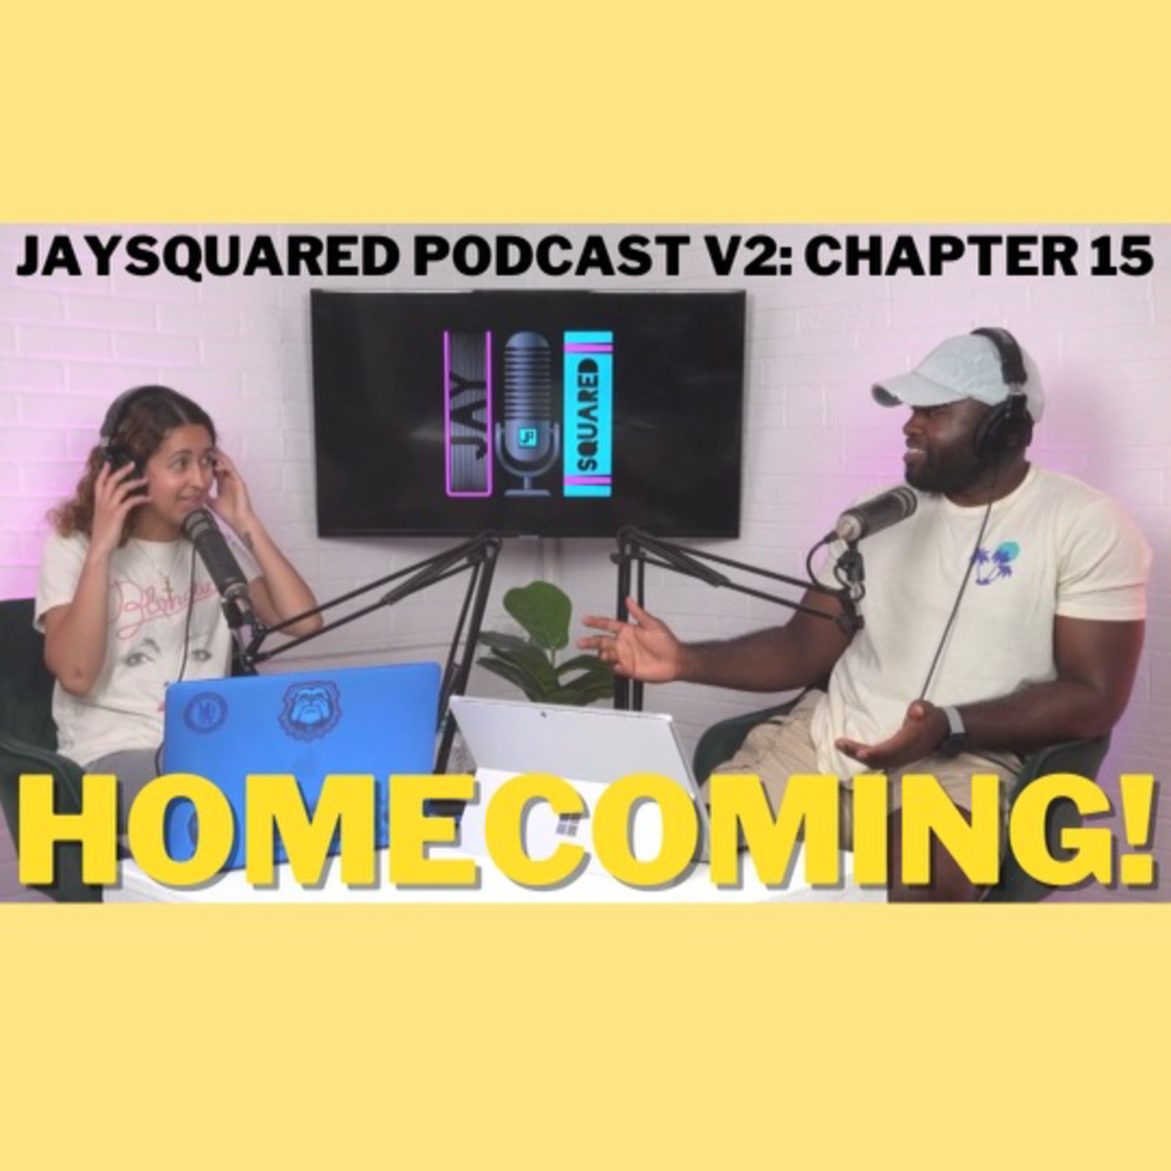 Black Podcasting - Volume 2 - Chapter 15: Homecoming!